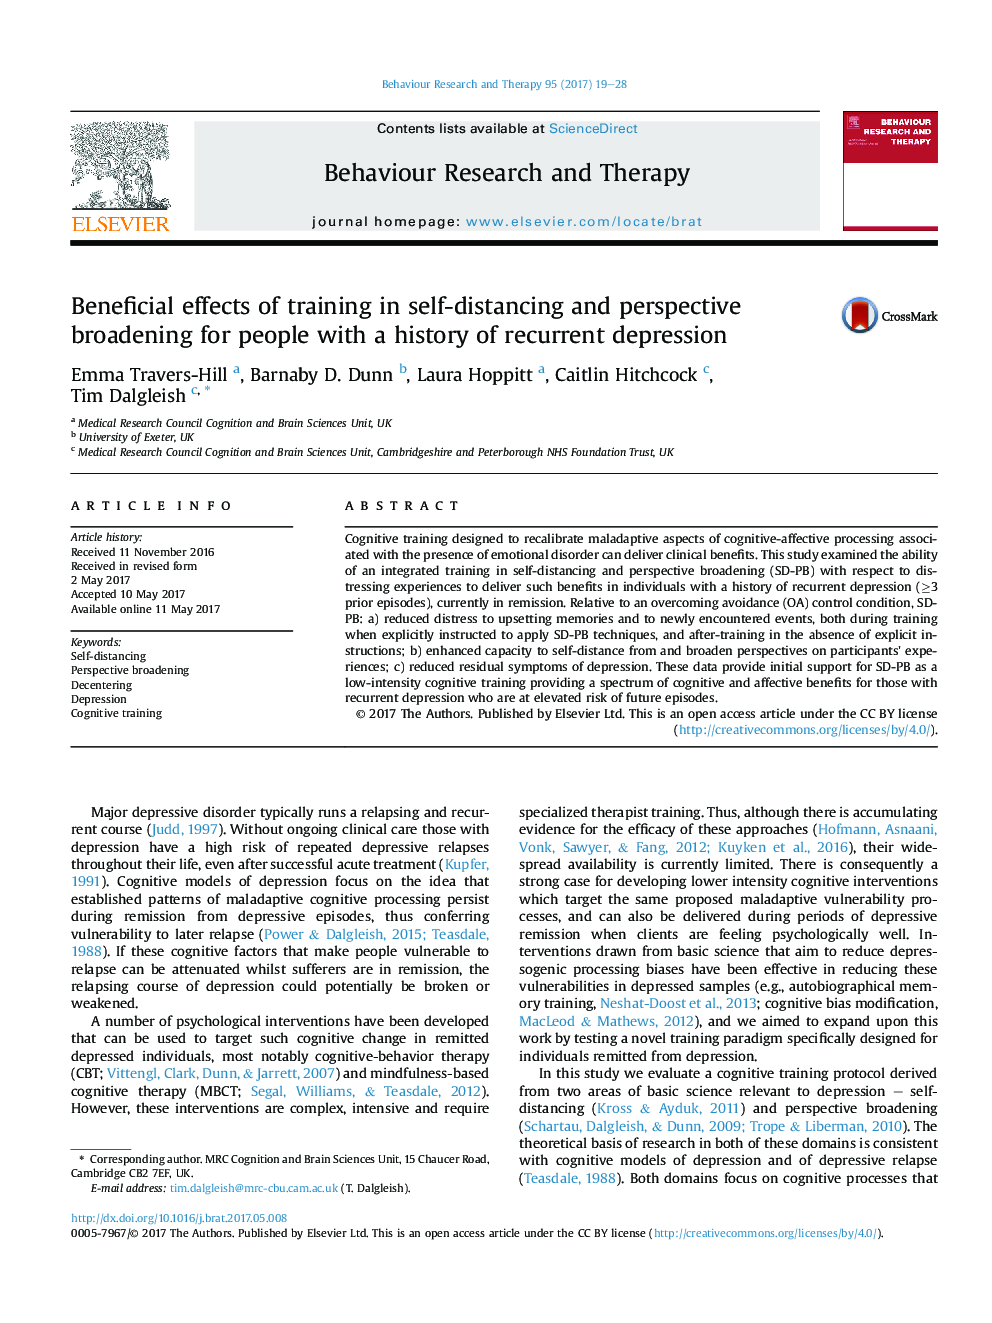 Beneficial effects of training in self-distancing and perspective broadening for people with a history of recurrent depression